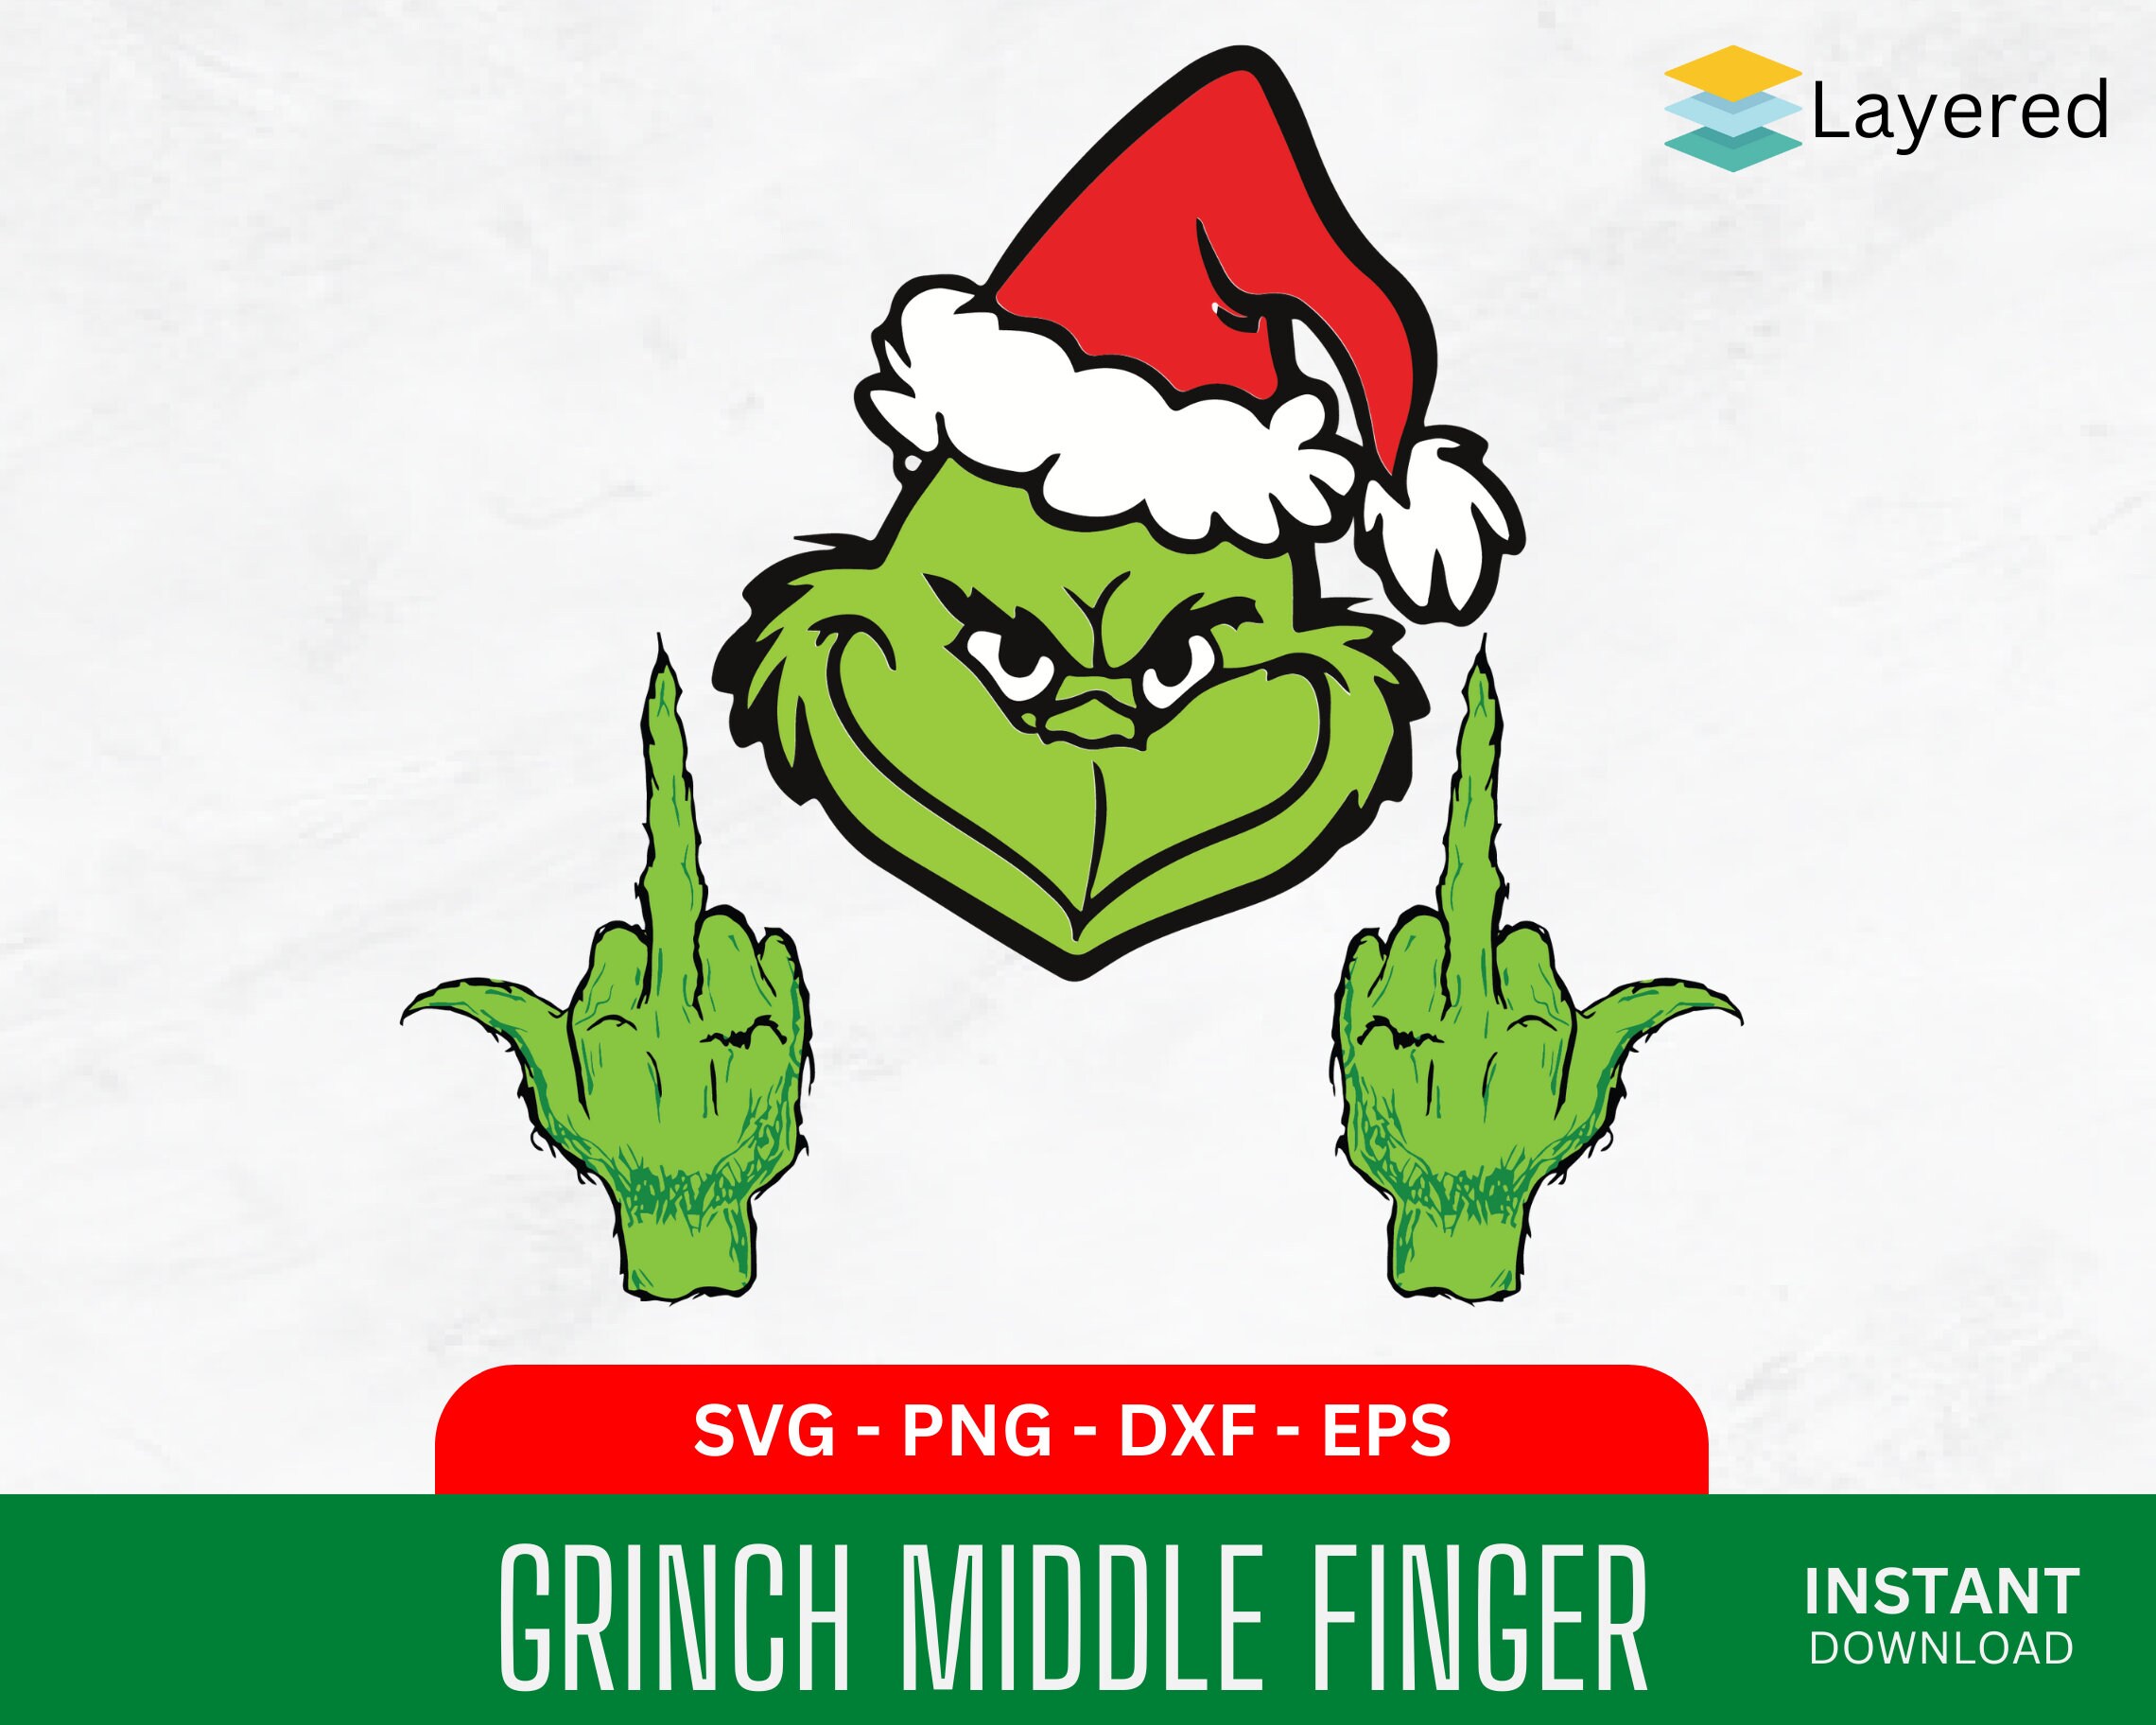 9. Grinch hand-painted nail design - wide 5